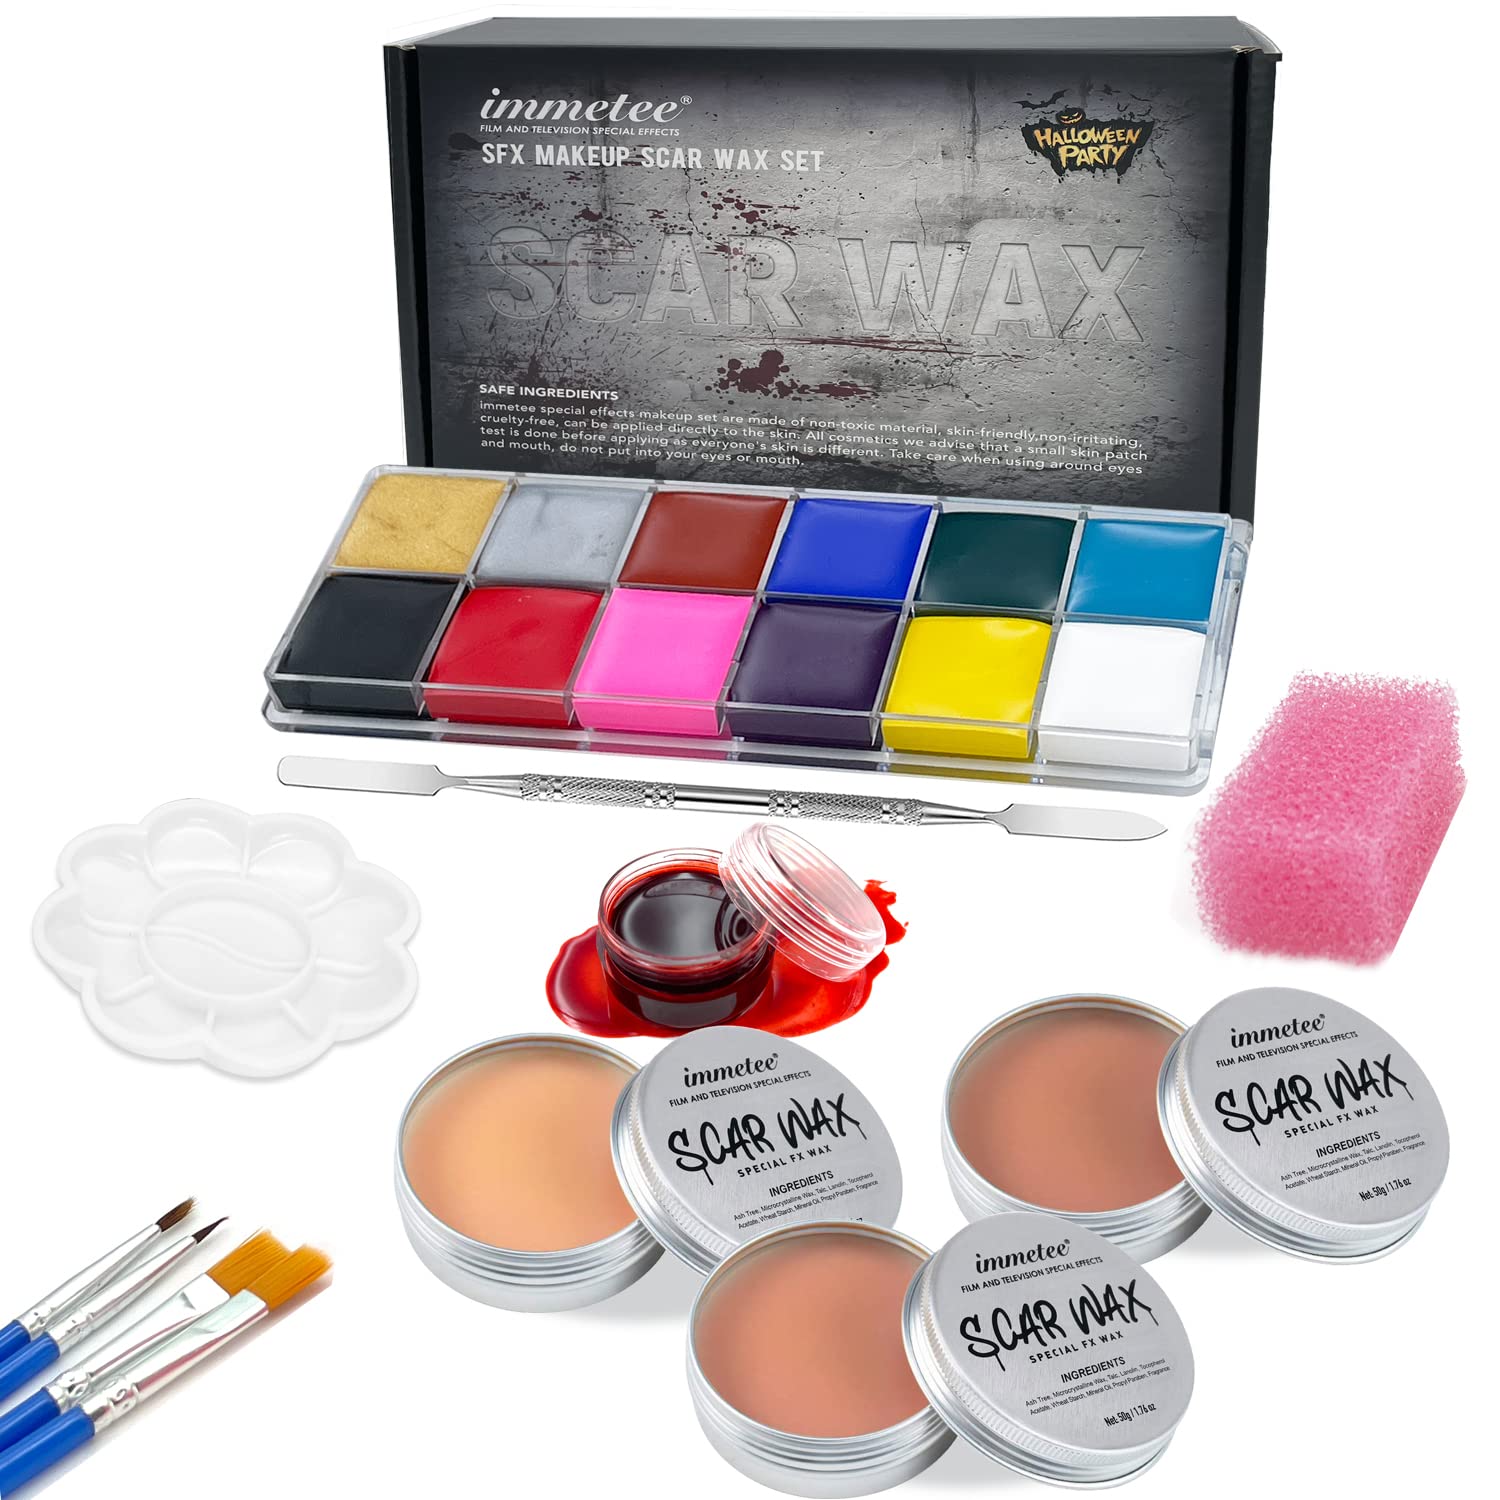 immetee Scar Wax SFX Makeup Kit, Face & Body Paint, Christmas Halloween Makeup  Kit, Fake Blood, Painting Brushes, Spatula, Stipple Sponge, Stage  Theatrical Party Cosplay, Carnival